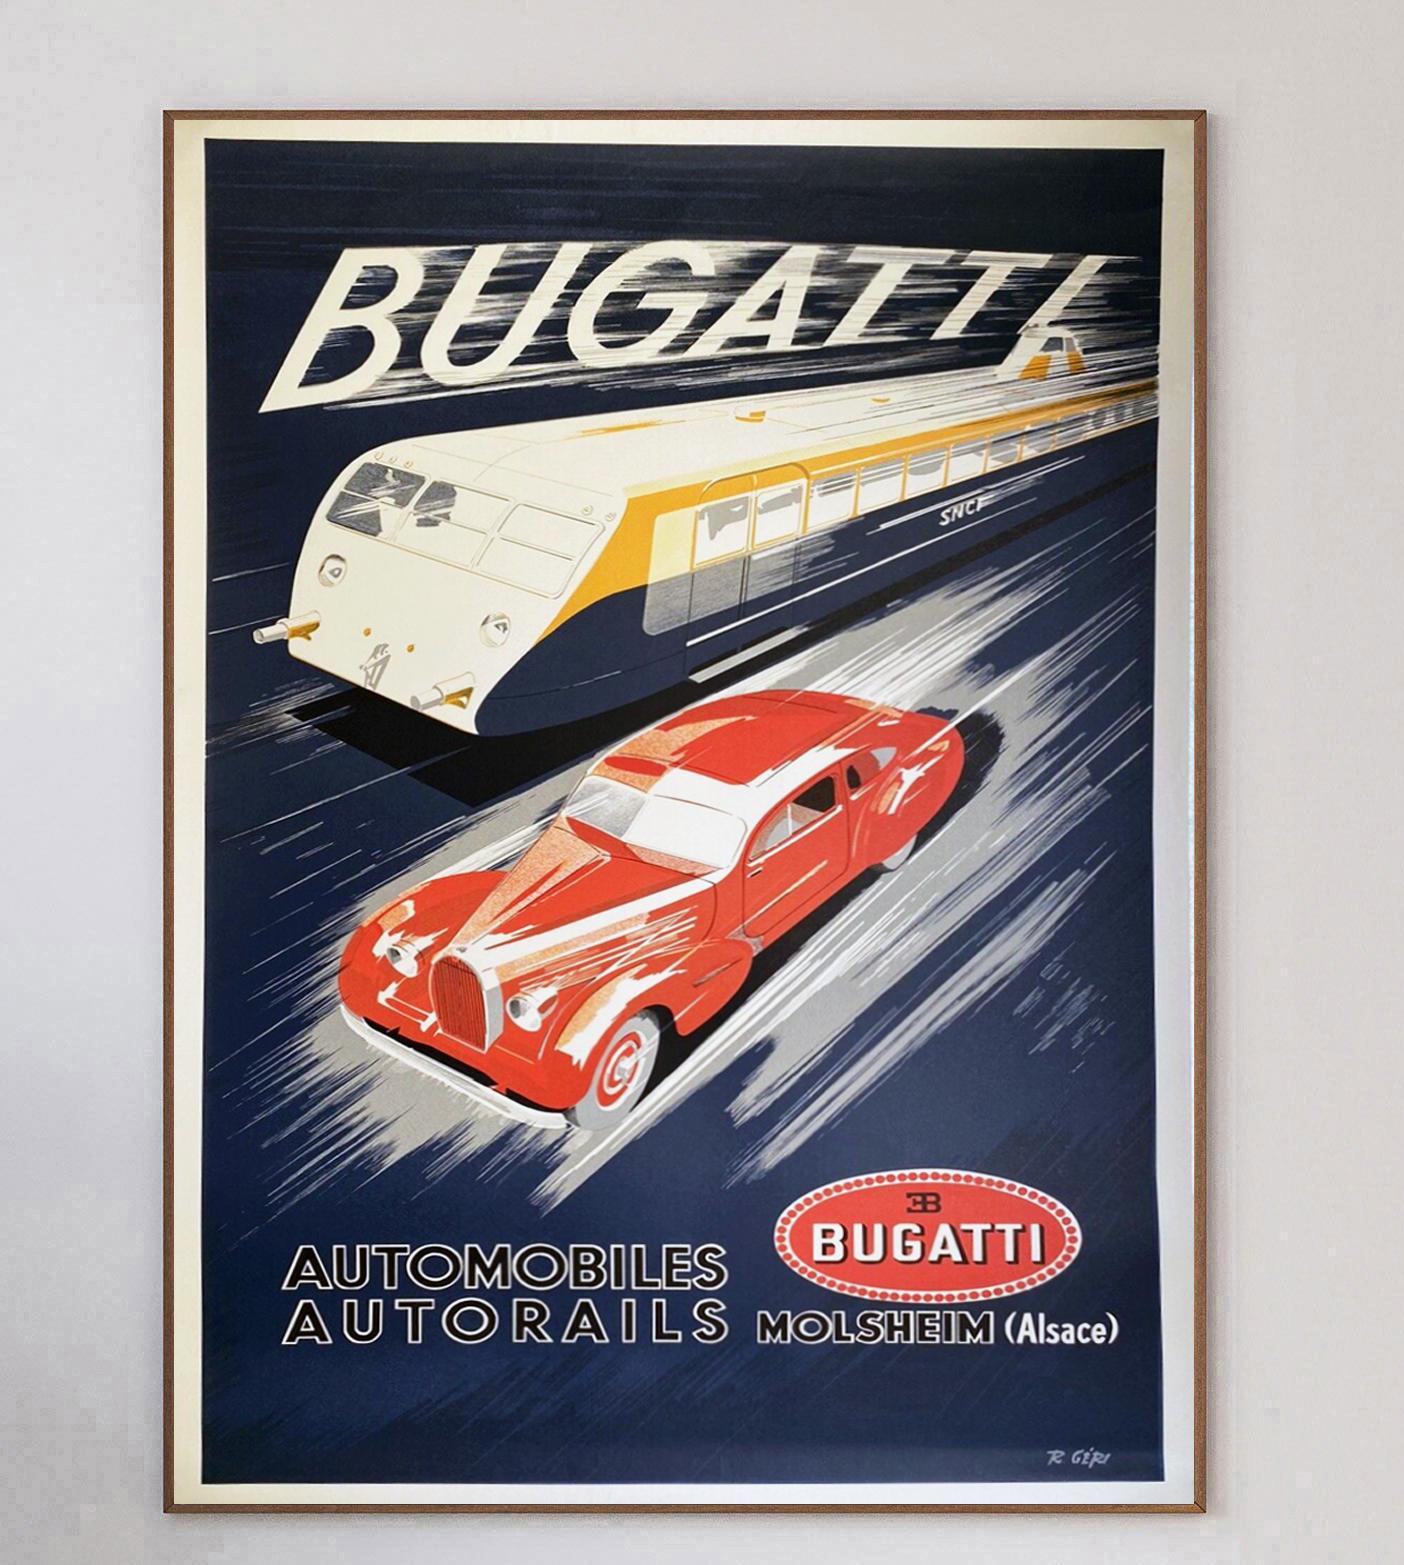 Stunning lithograph poster created in 1970 for Bugatti. With art deco artwork from artist R. Geti, the poster depicts a speeding vintage Bugatti being driven in a race against a train. The German/ French high performance car manufacturer was founded